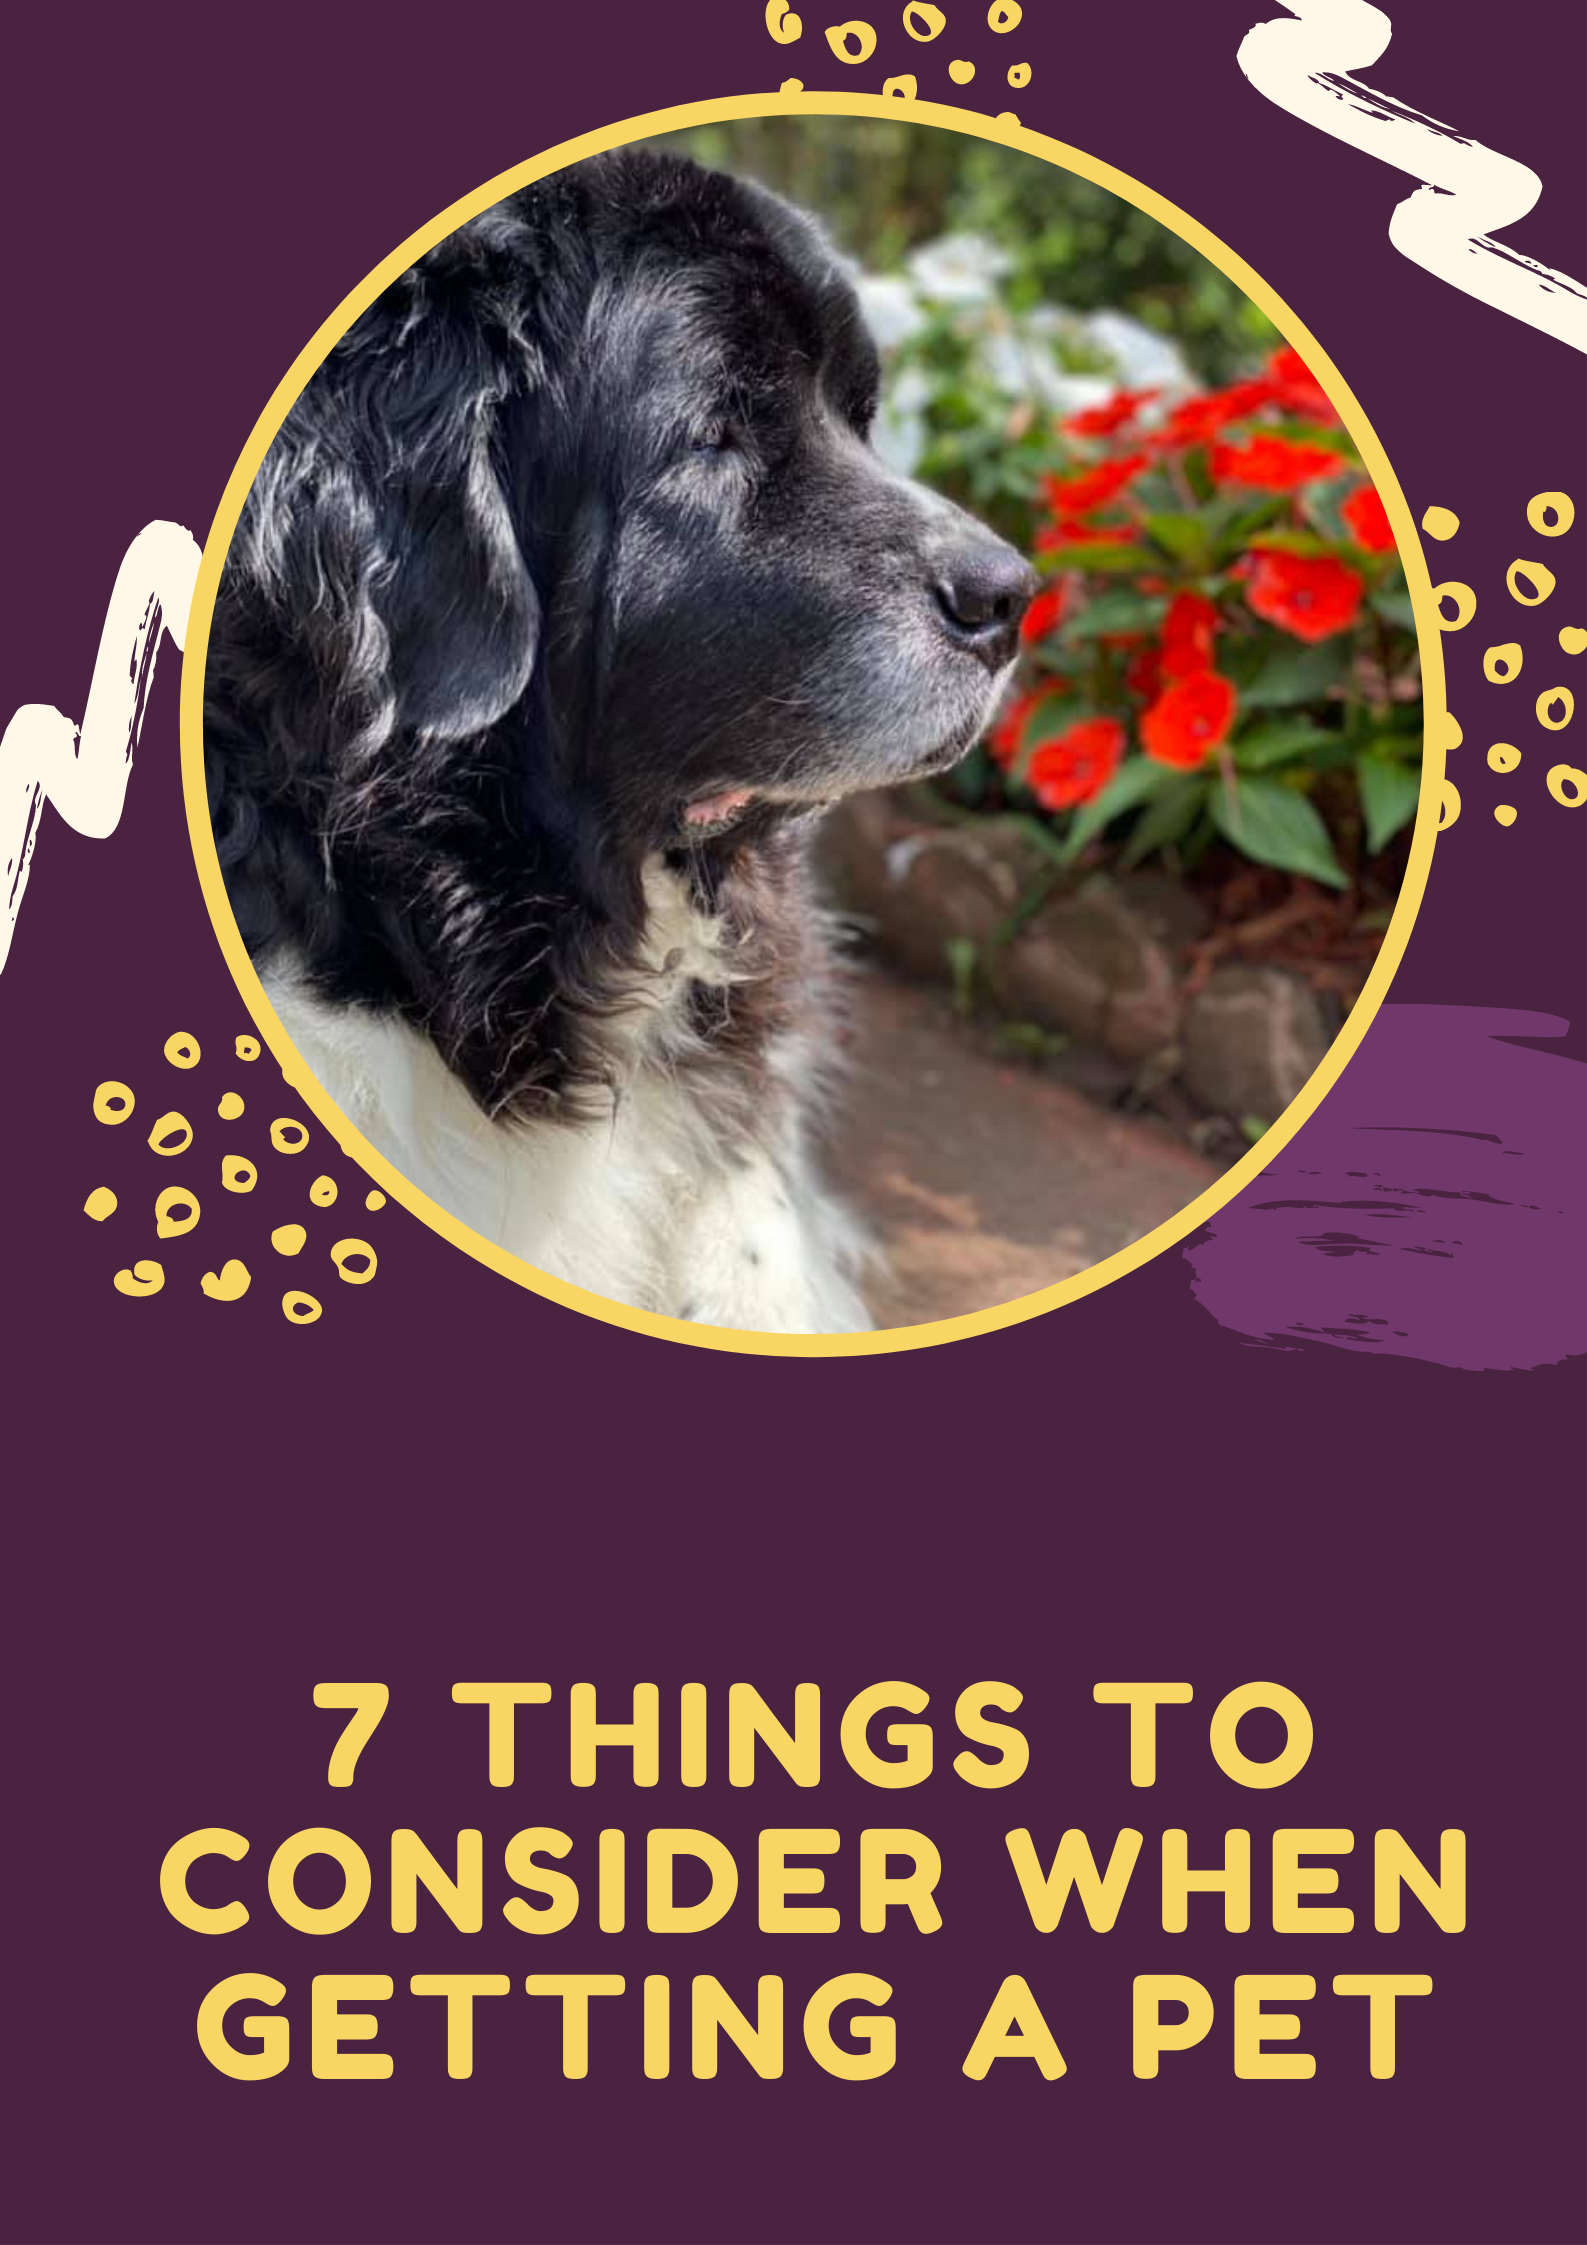 7 Things to Consider When Getting A Pet